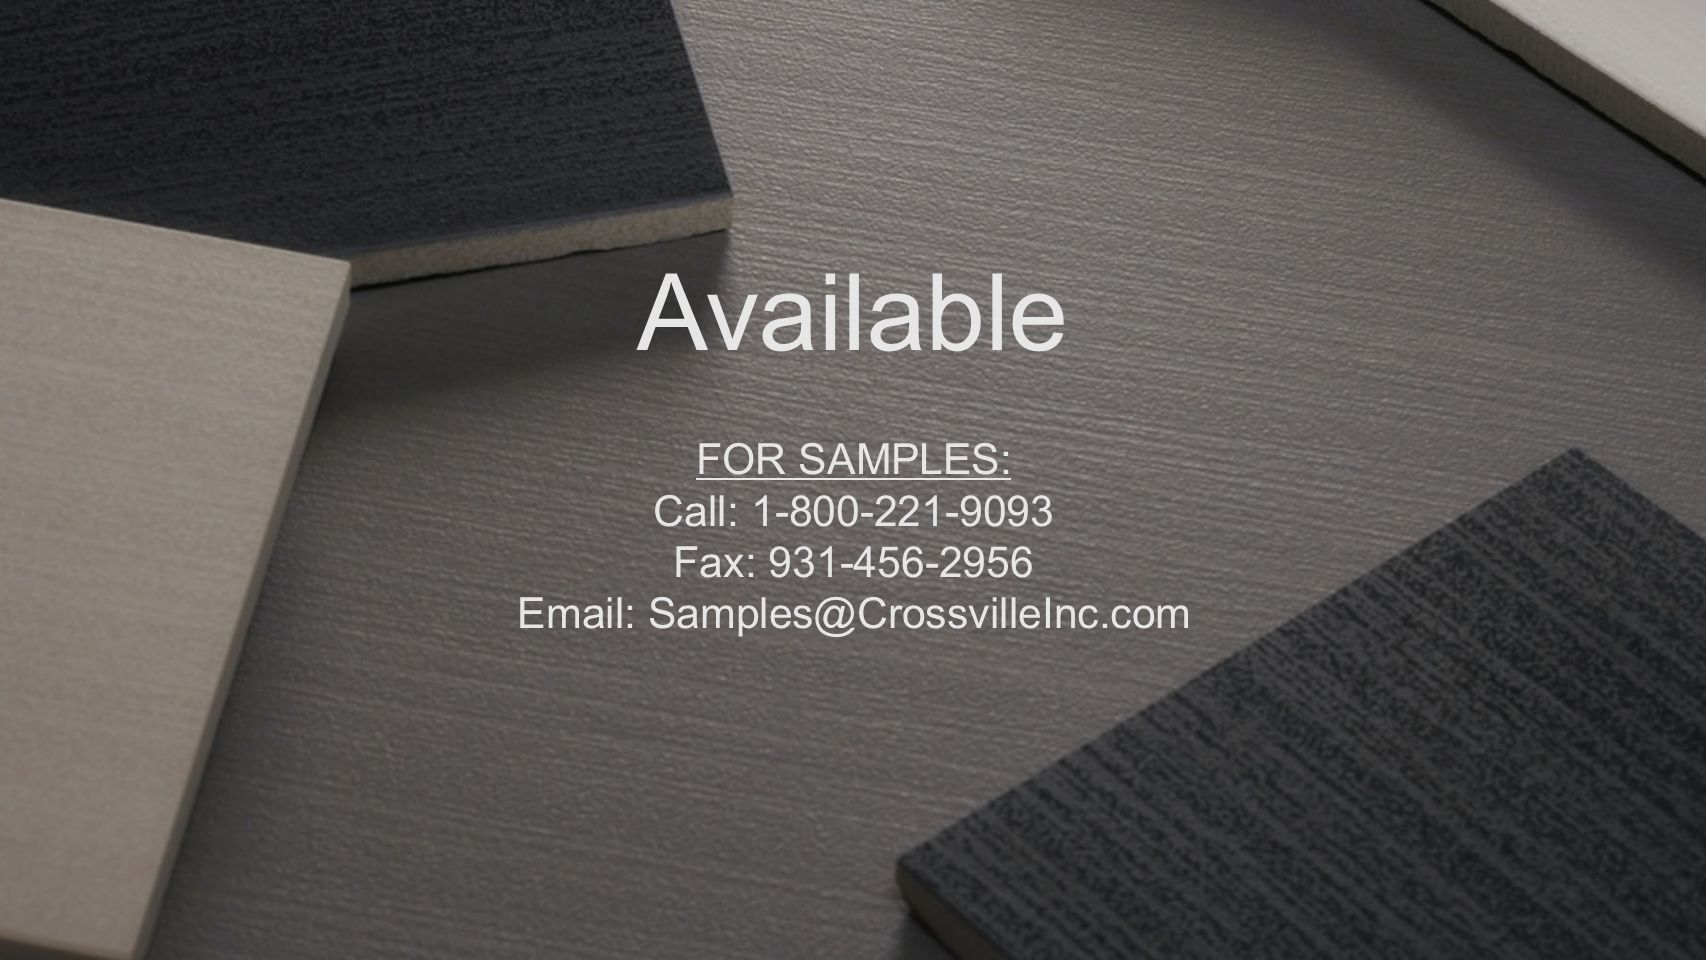 Available FOR SAMPLES: Call: Fax: